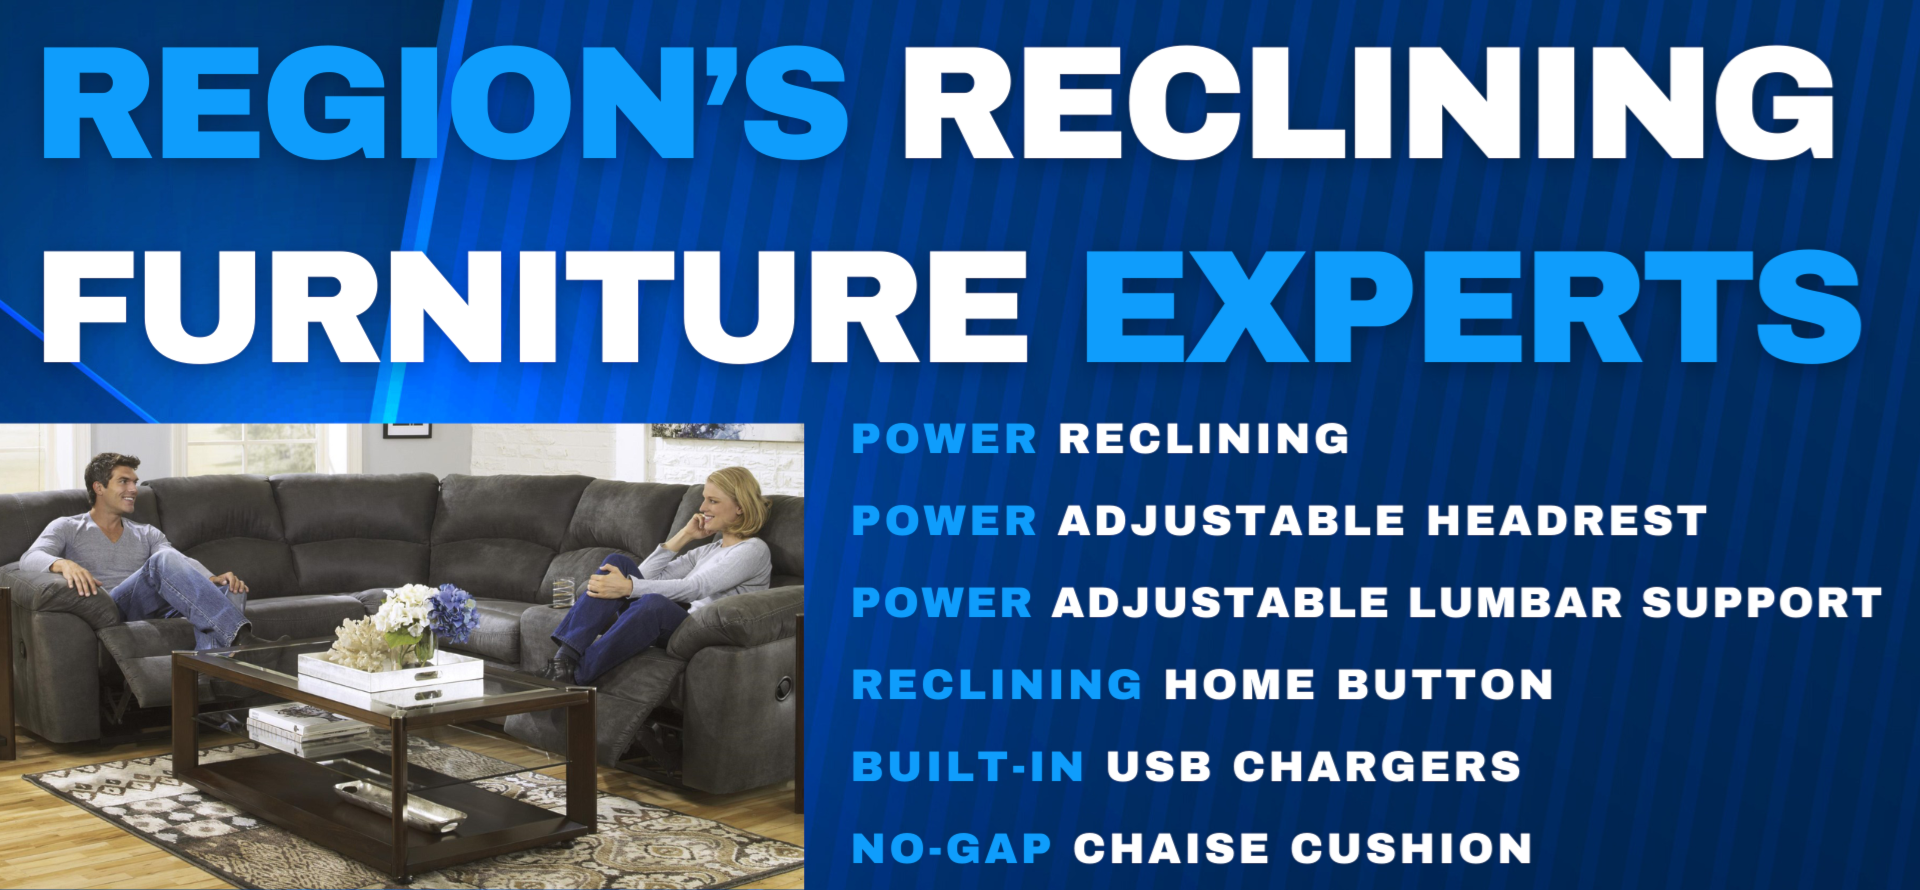 The Region's Reclining Furniture Experts